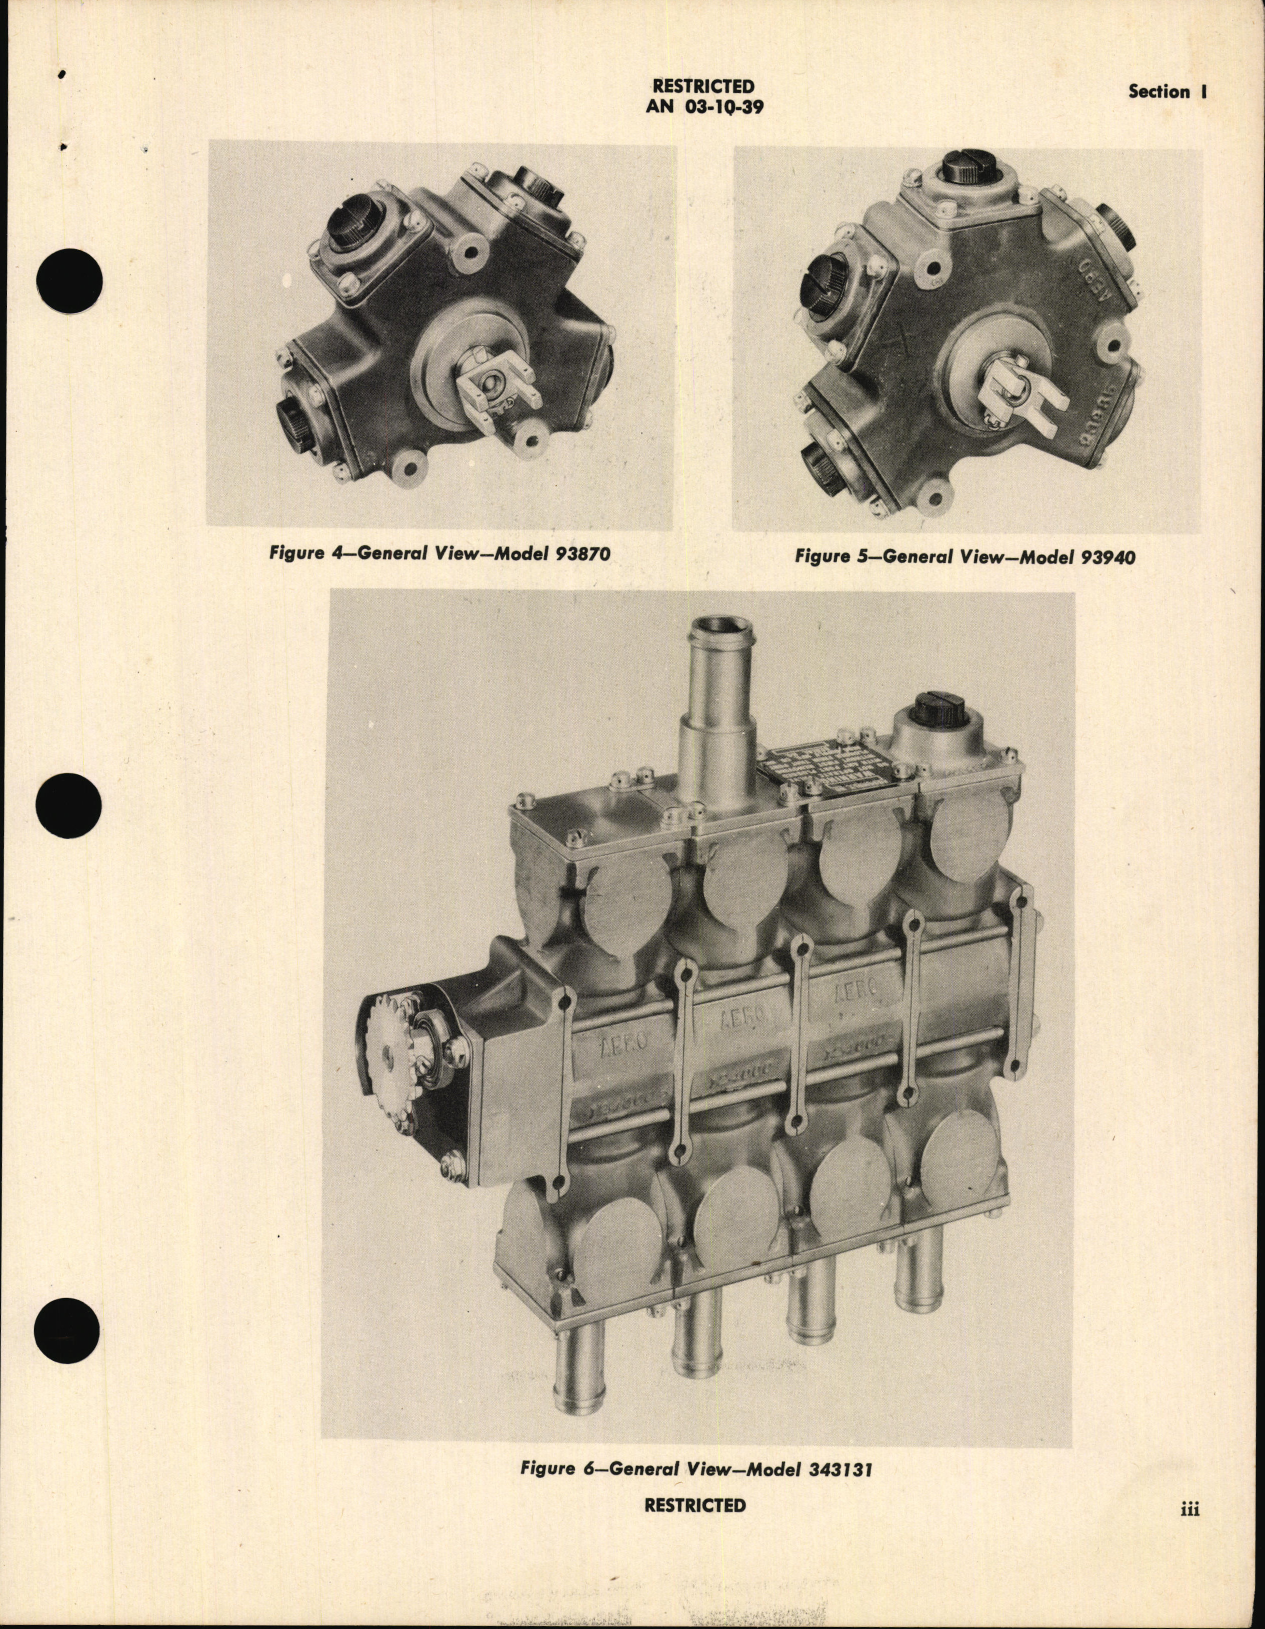 Sample page 5 from AirCorps Library document: Handbook of Instructions with Parts Catalog for Fuel Selector Valves